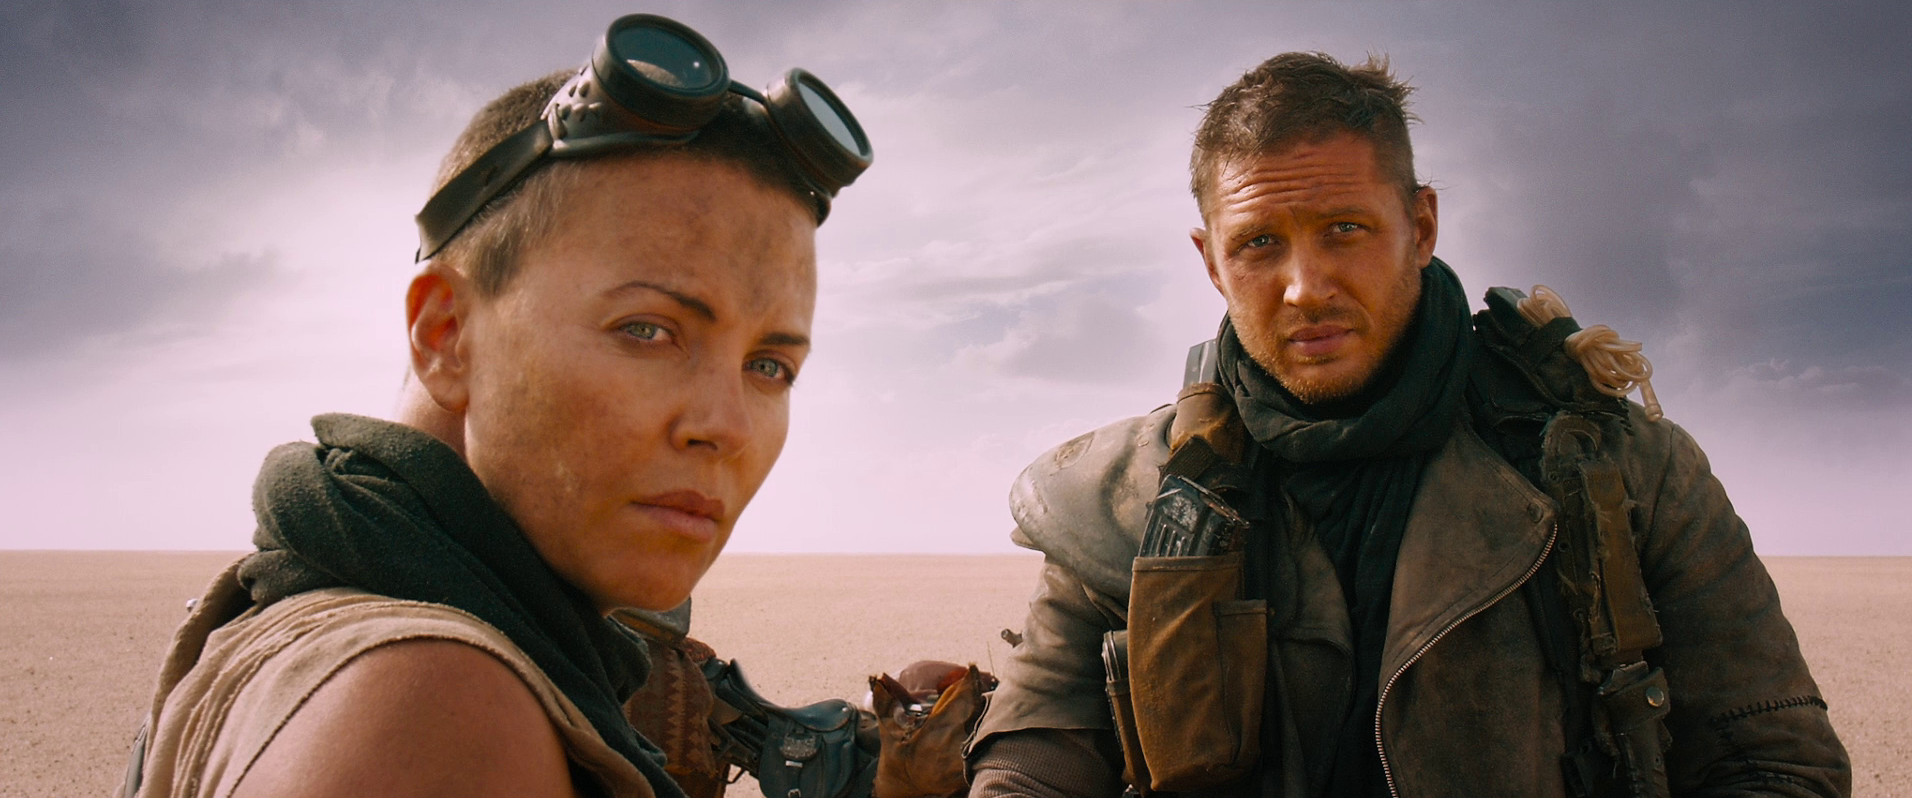 Tom Hardy and Charlize Theron in Mad Max: Fury Road.